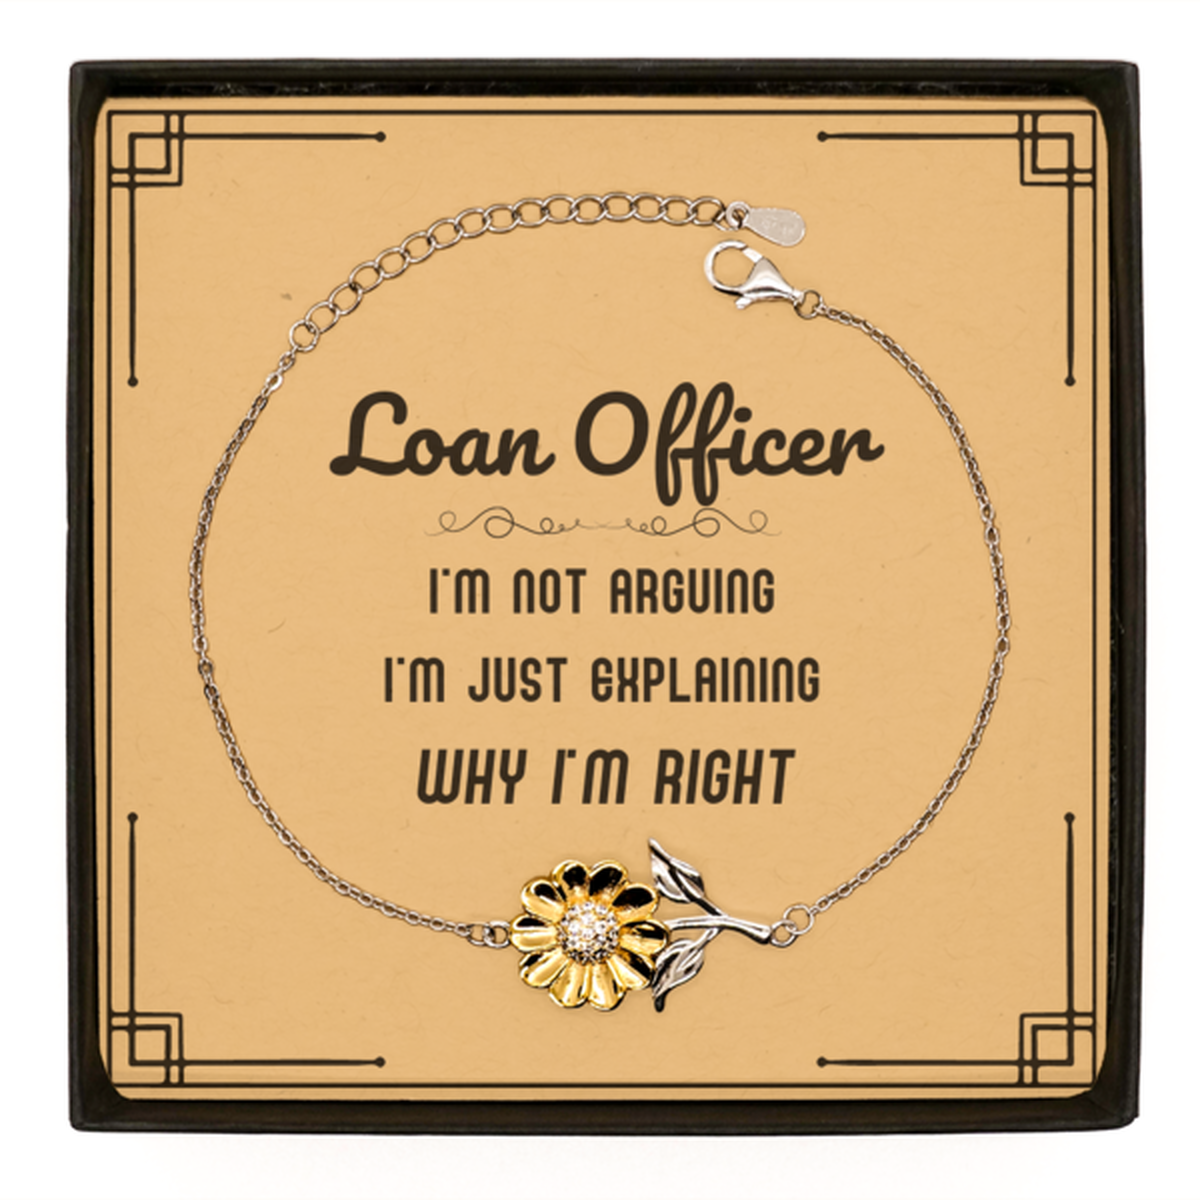 Loan Officer I'm not Arguing. I'm Just Explaining Why I'm RIGHT Sunflower Bracelet, Funny Saying Quote Loan Officer Gifts For Loan Officer Message Card Graduation Birthday Christmas Gifts for Men Women Coworker